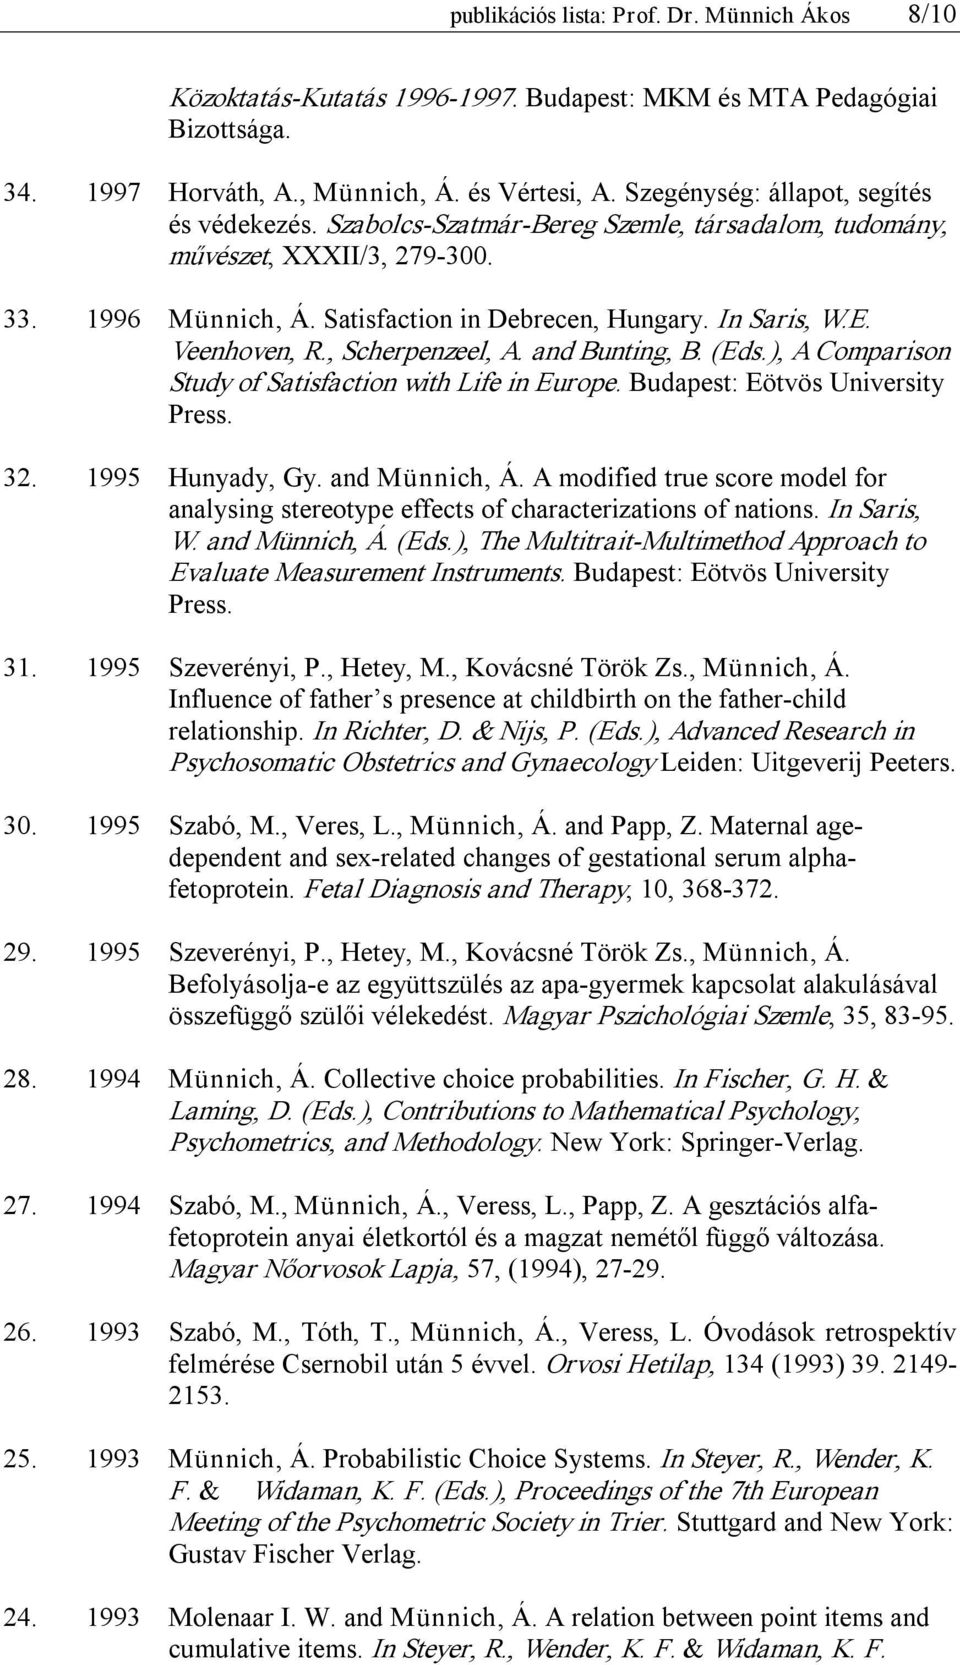 Veenhoven, R., Scherpenzeel, A. and Bunting, B. (Eds.), A Comparison Study of Satisfaction with Life in Europe. Budapest: Eötvös University Press. 32. 1995 Hunyady, Gy. and Münnich, Á.